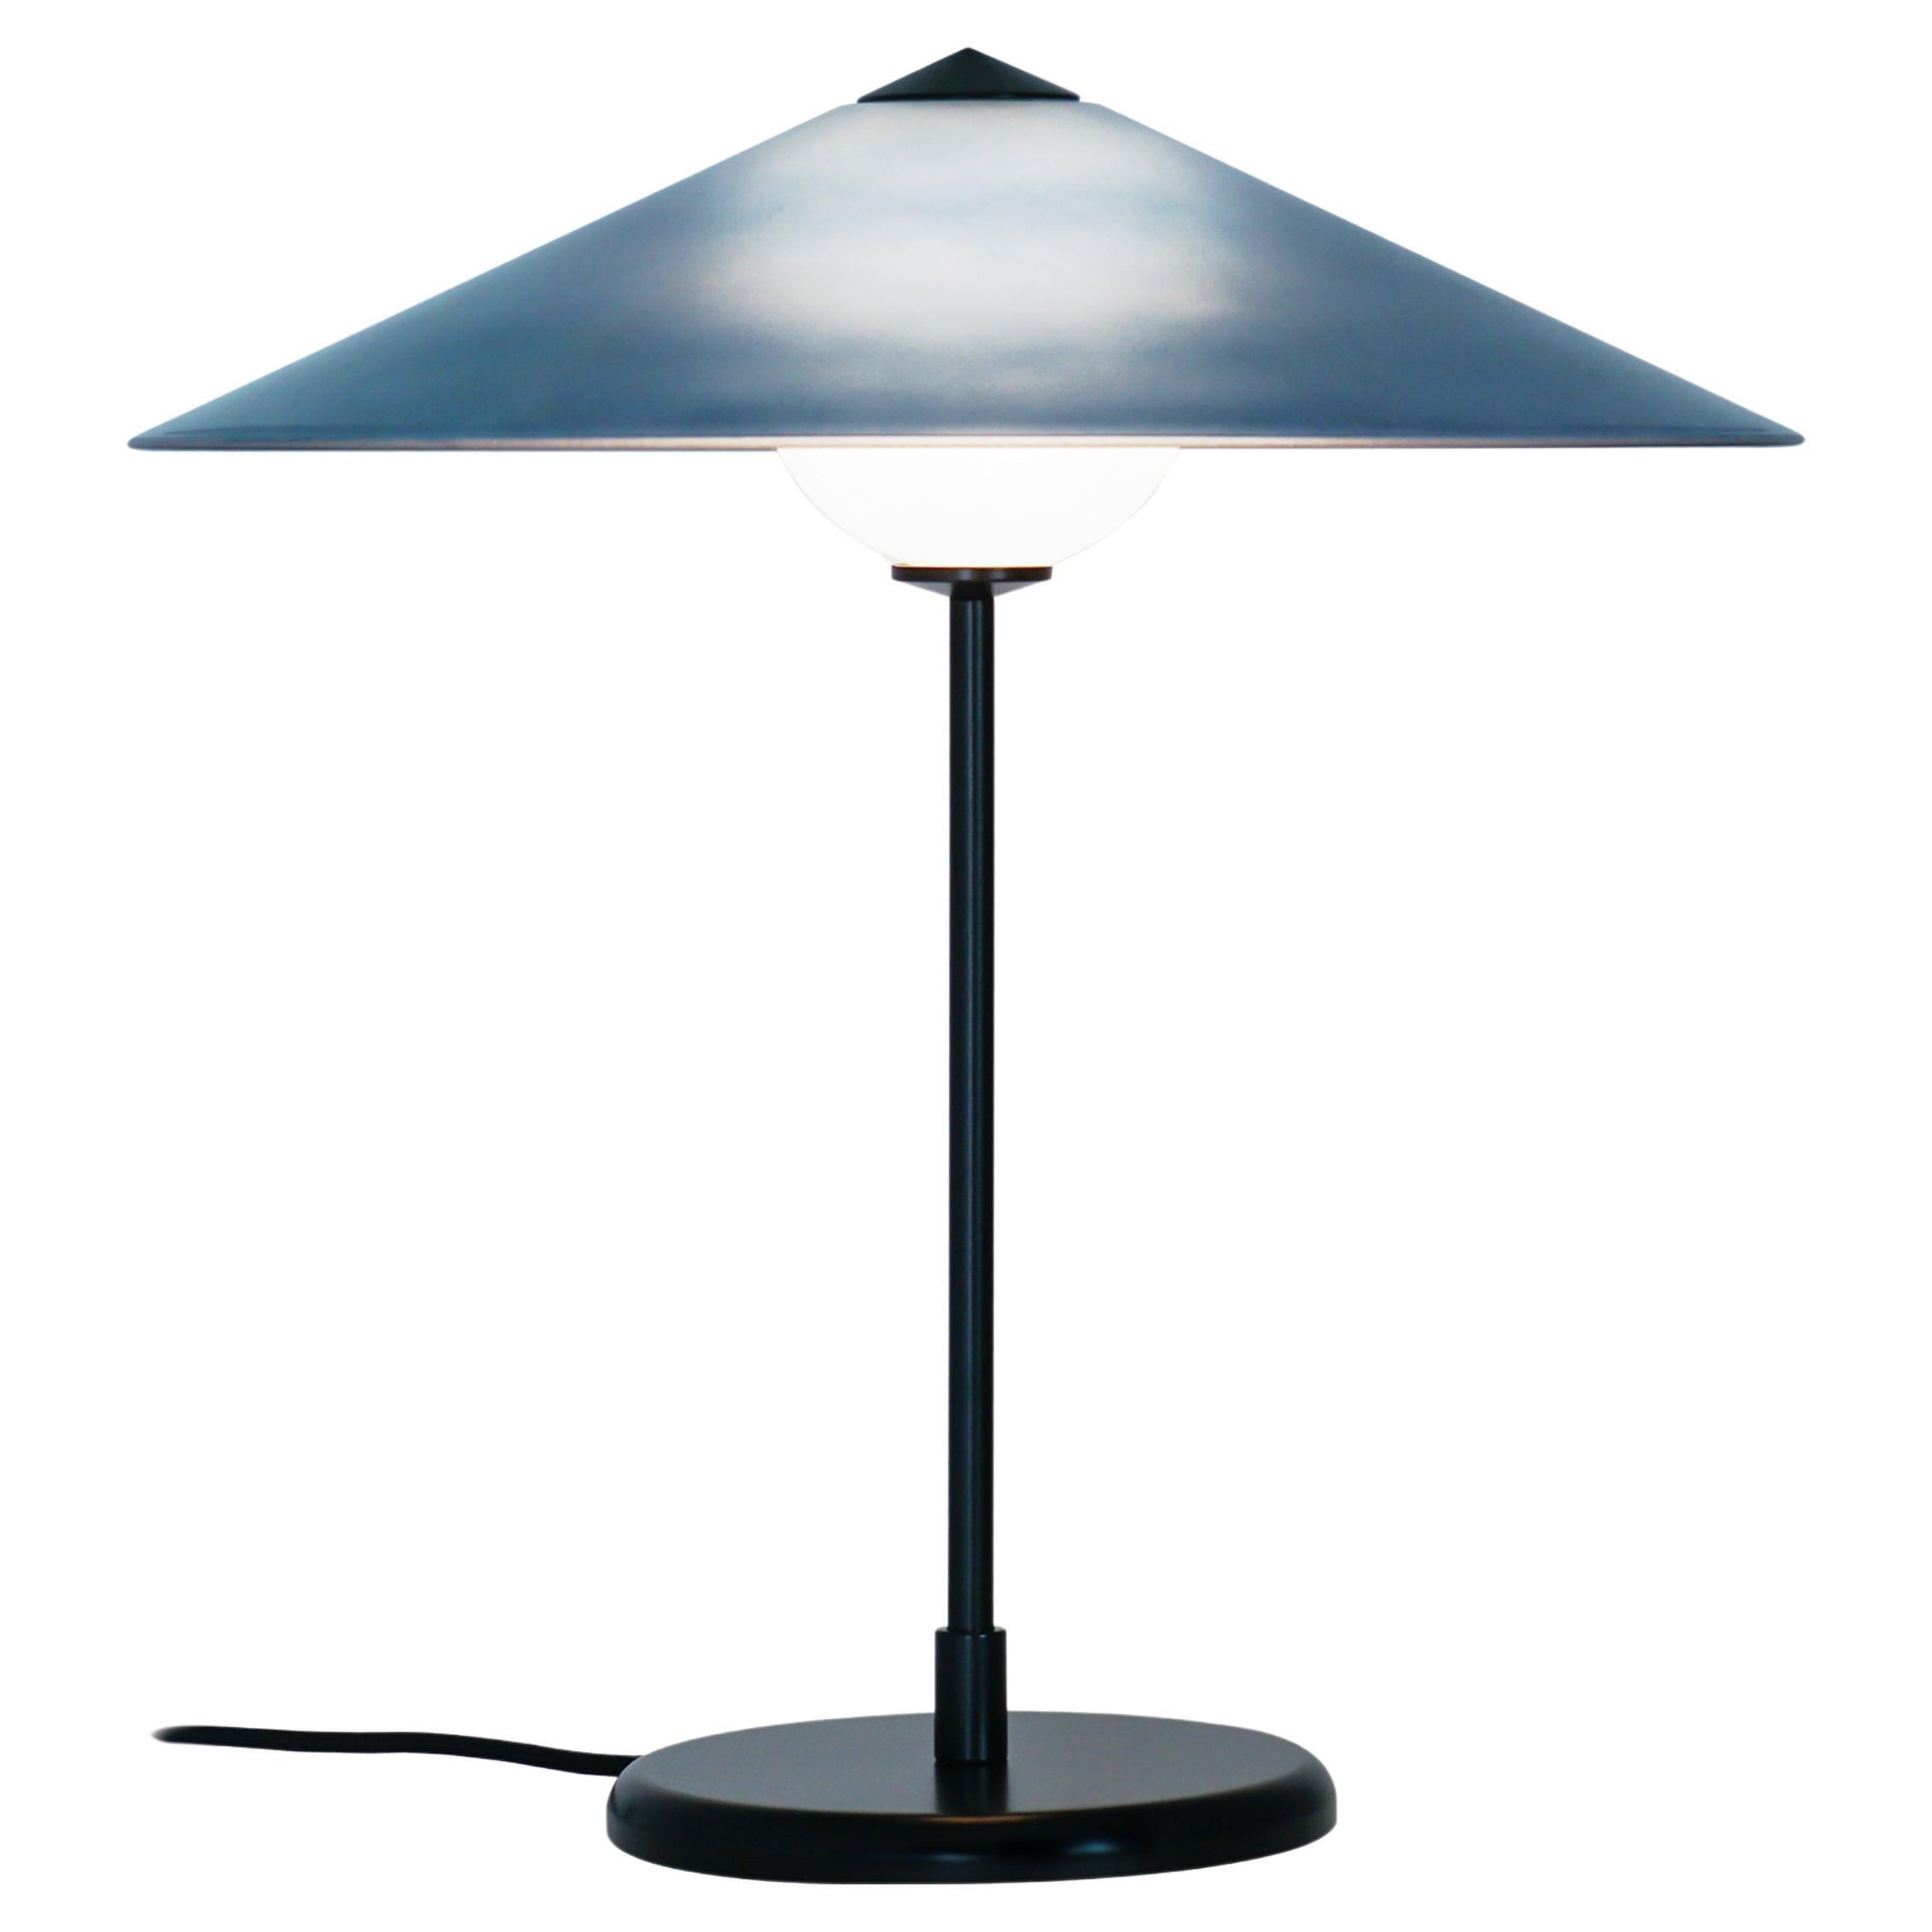 MARSHA Table Lamp in Regal Blue Glass & Black Powder Coated Metal Finish For Sale